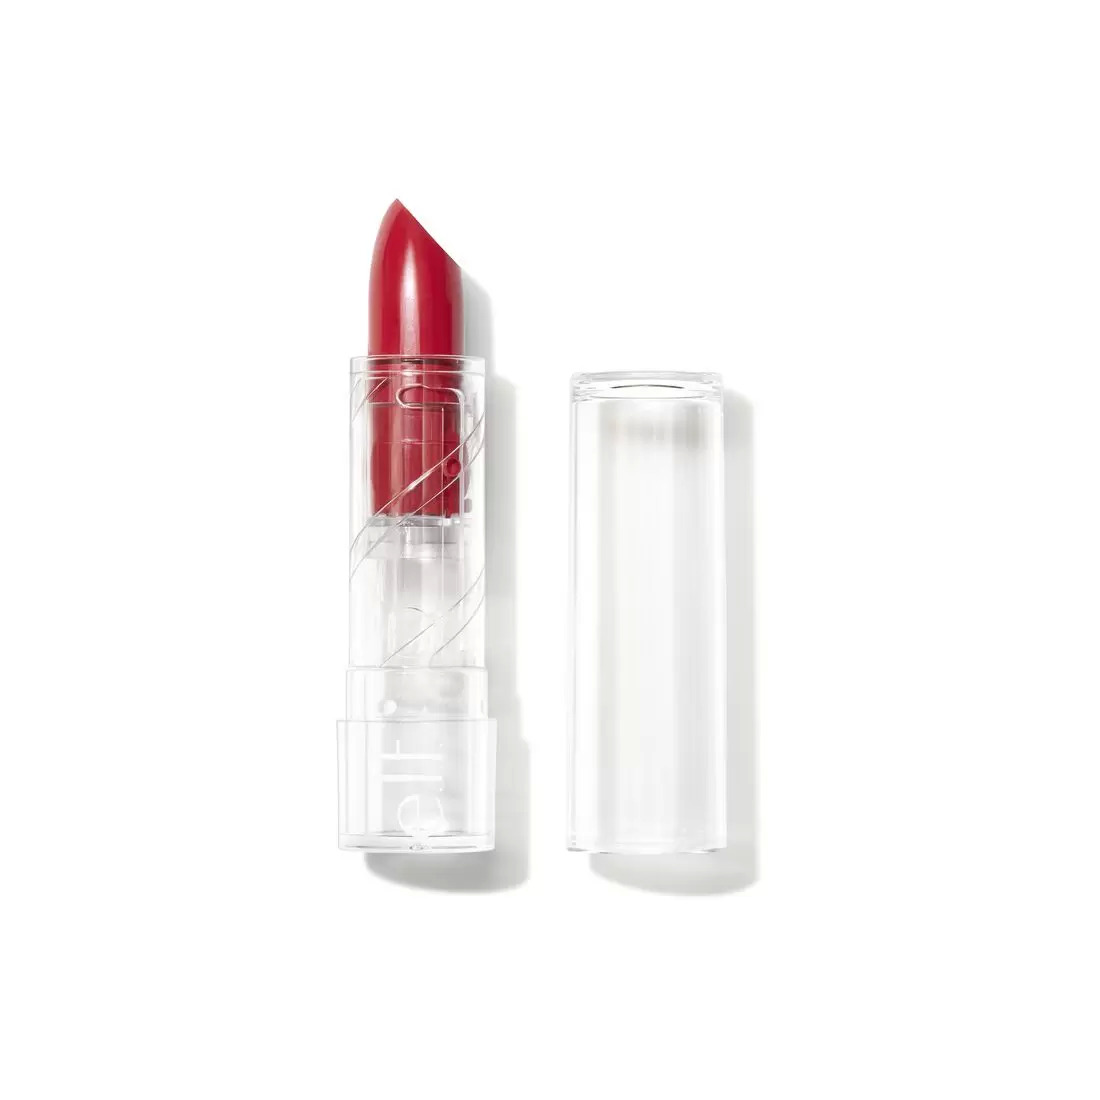 e.l.f. Cosmetics Extra 40% Off Sale: Srsly Satin Lipstick $1.45, Mineral Infused Mascara $1.90 & More + Free Shipping $15+